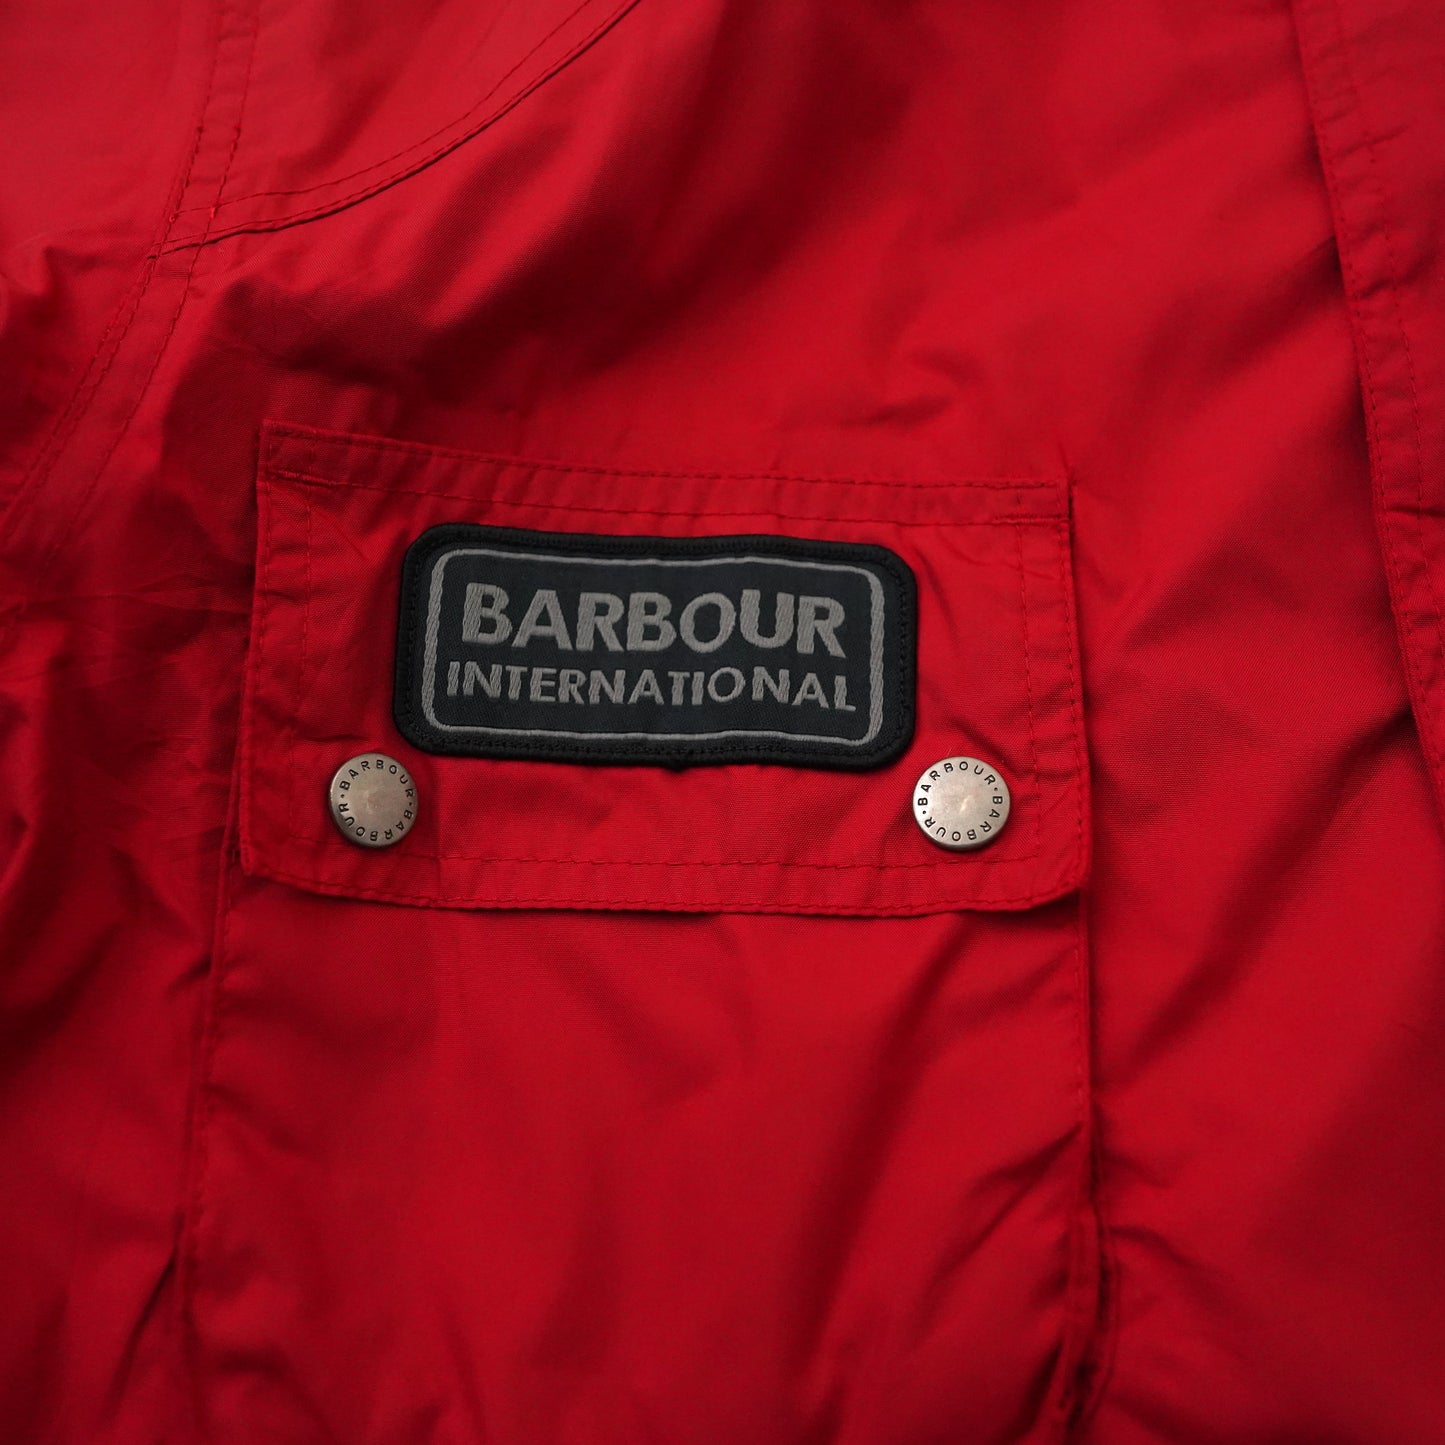 Barbour polyester jacket